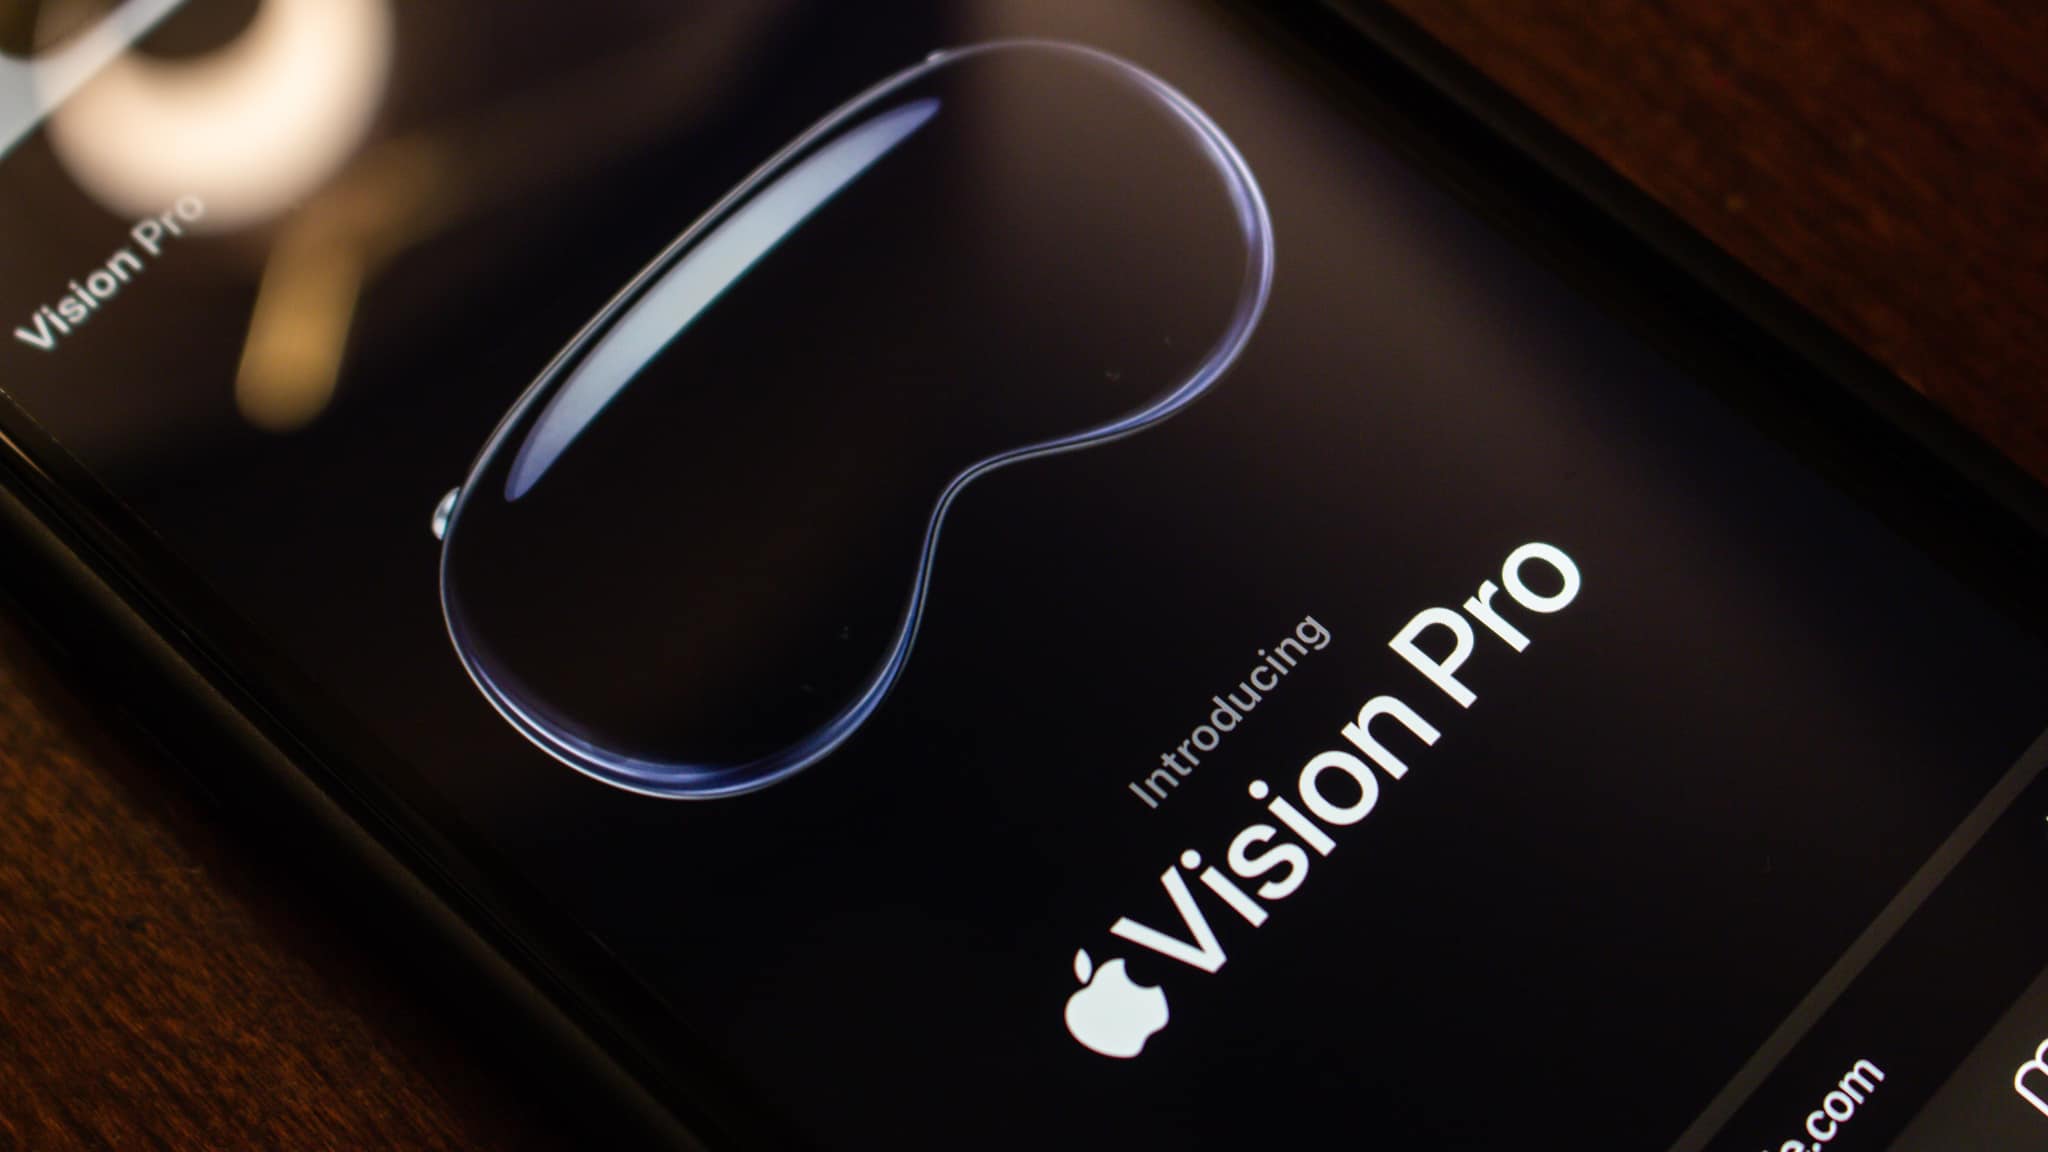 Apple Will Ship the Vision Pro Without a Netflix App